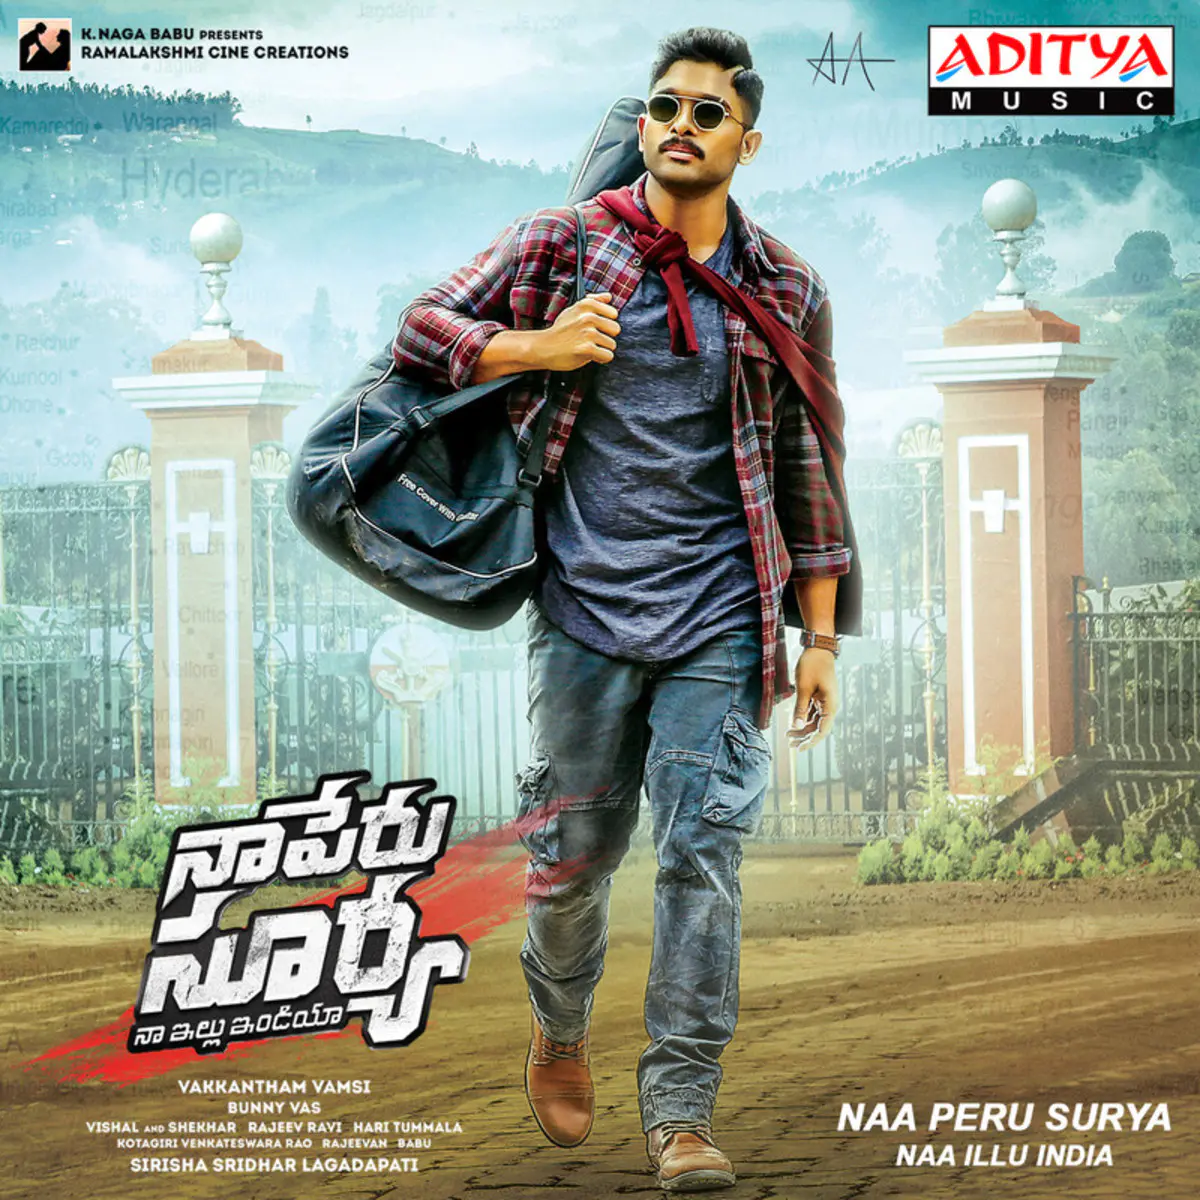 Naa Peru Surya Naa Illu India Songs Download Allu Arjun Naa Peru Surya Naa Illu India Mp3 Telugu Songs Online Free On Gaana Com You can watch the movie online on zee5, as long as you are a subscriber to the video streaming ott platform. naa peru surya naa illu india songs